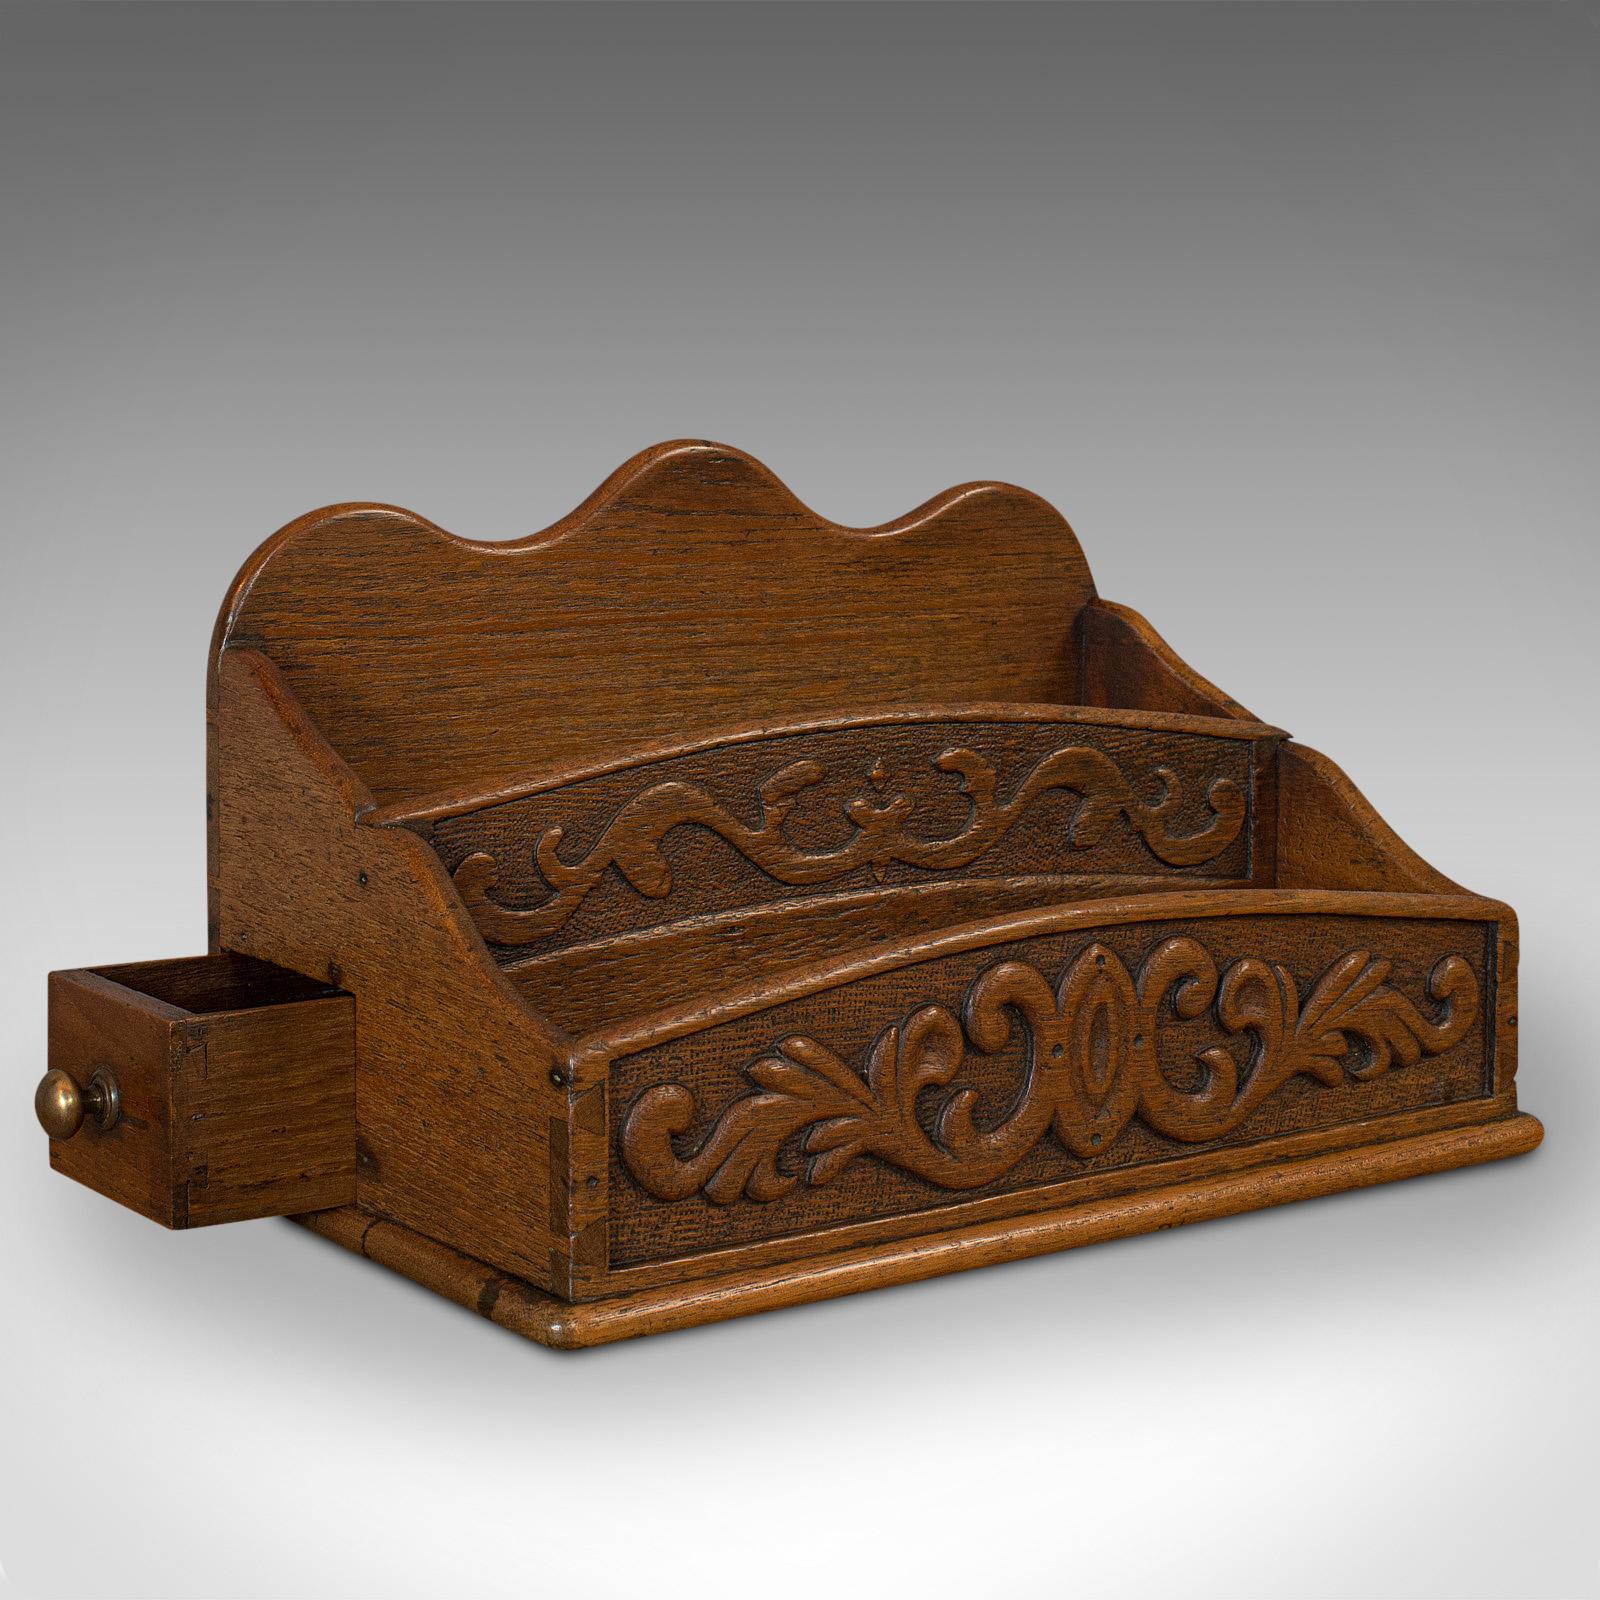 This is an antique butler's stationery tidy. An English, oak storage box in Arts & Crafts taste, dating to the late Victorian period, circa 1900. 

Appealing carved details
Displays a desirable aged patina
Oak shows fine grain interest
Dovetail